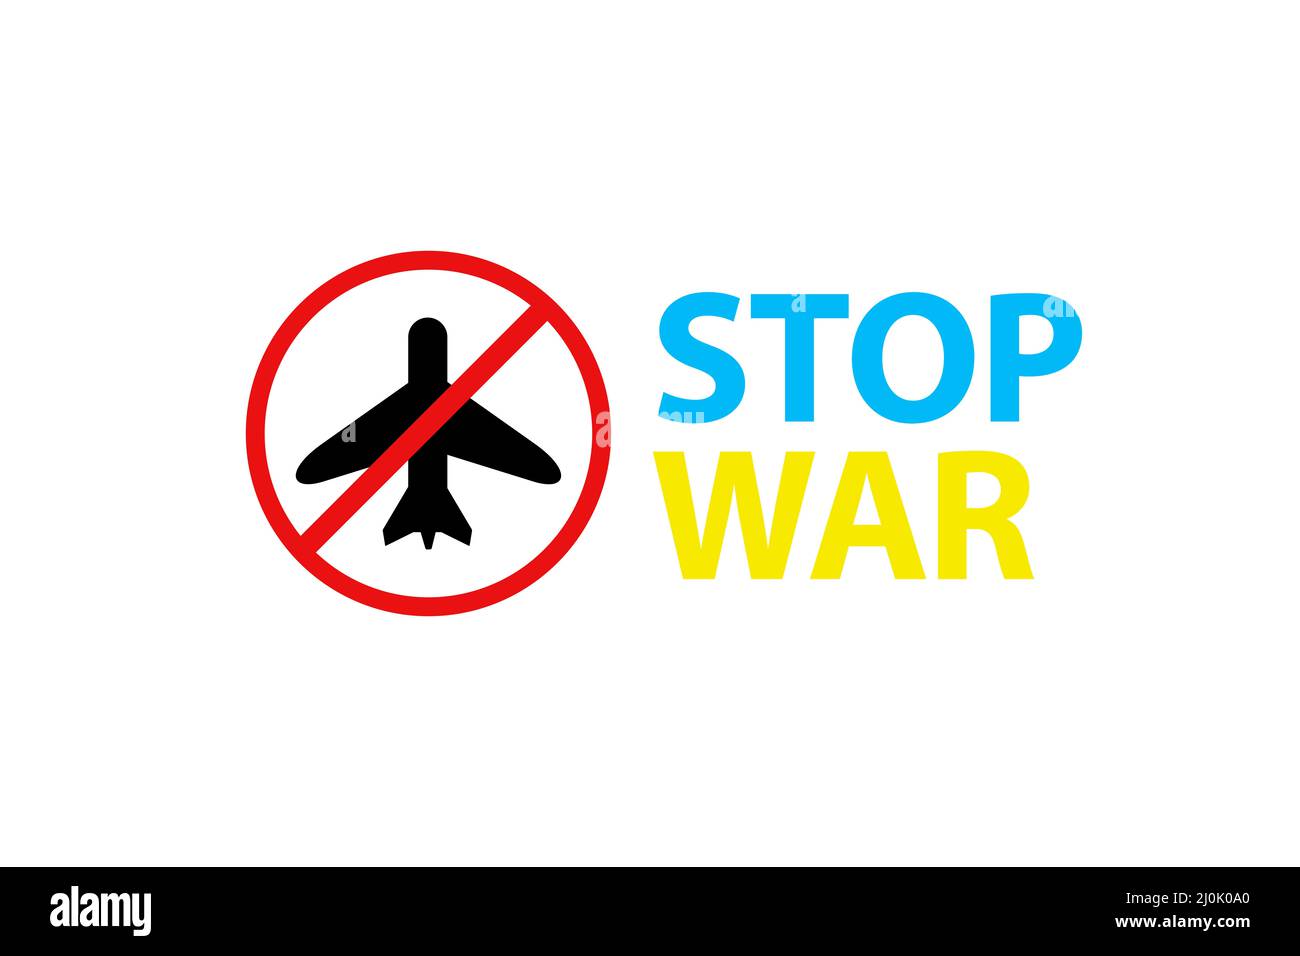 Close The Sky of Ukraine slogan. Protest against the war in Ukraine Red forbidding sign and military aircraft on white background isolation Stock Photo